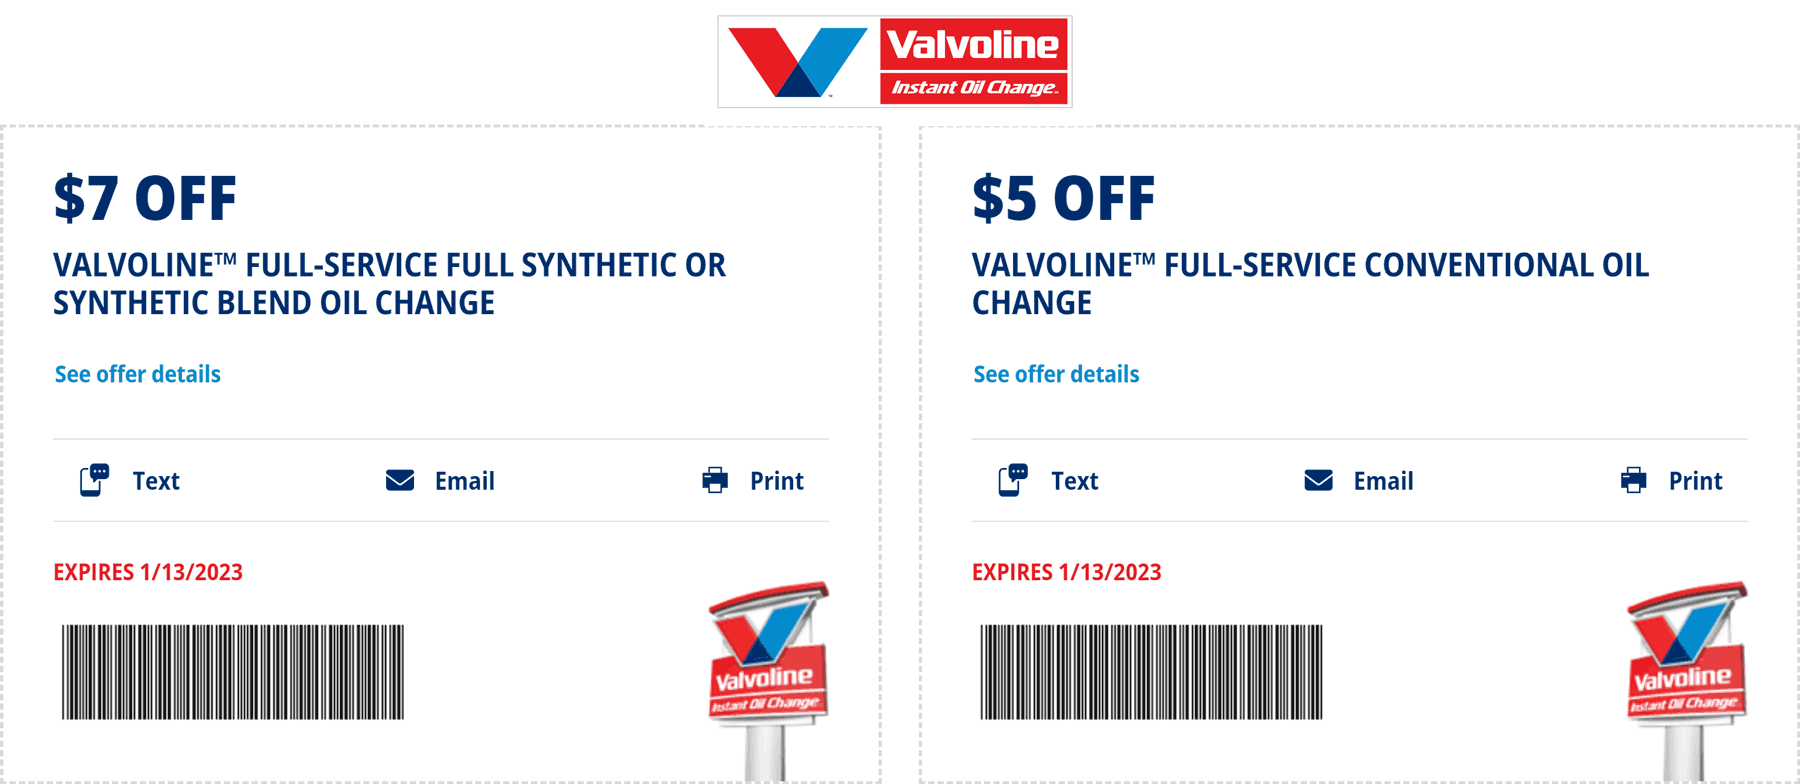 Valvoline coupons & promo code for [February 2023]